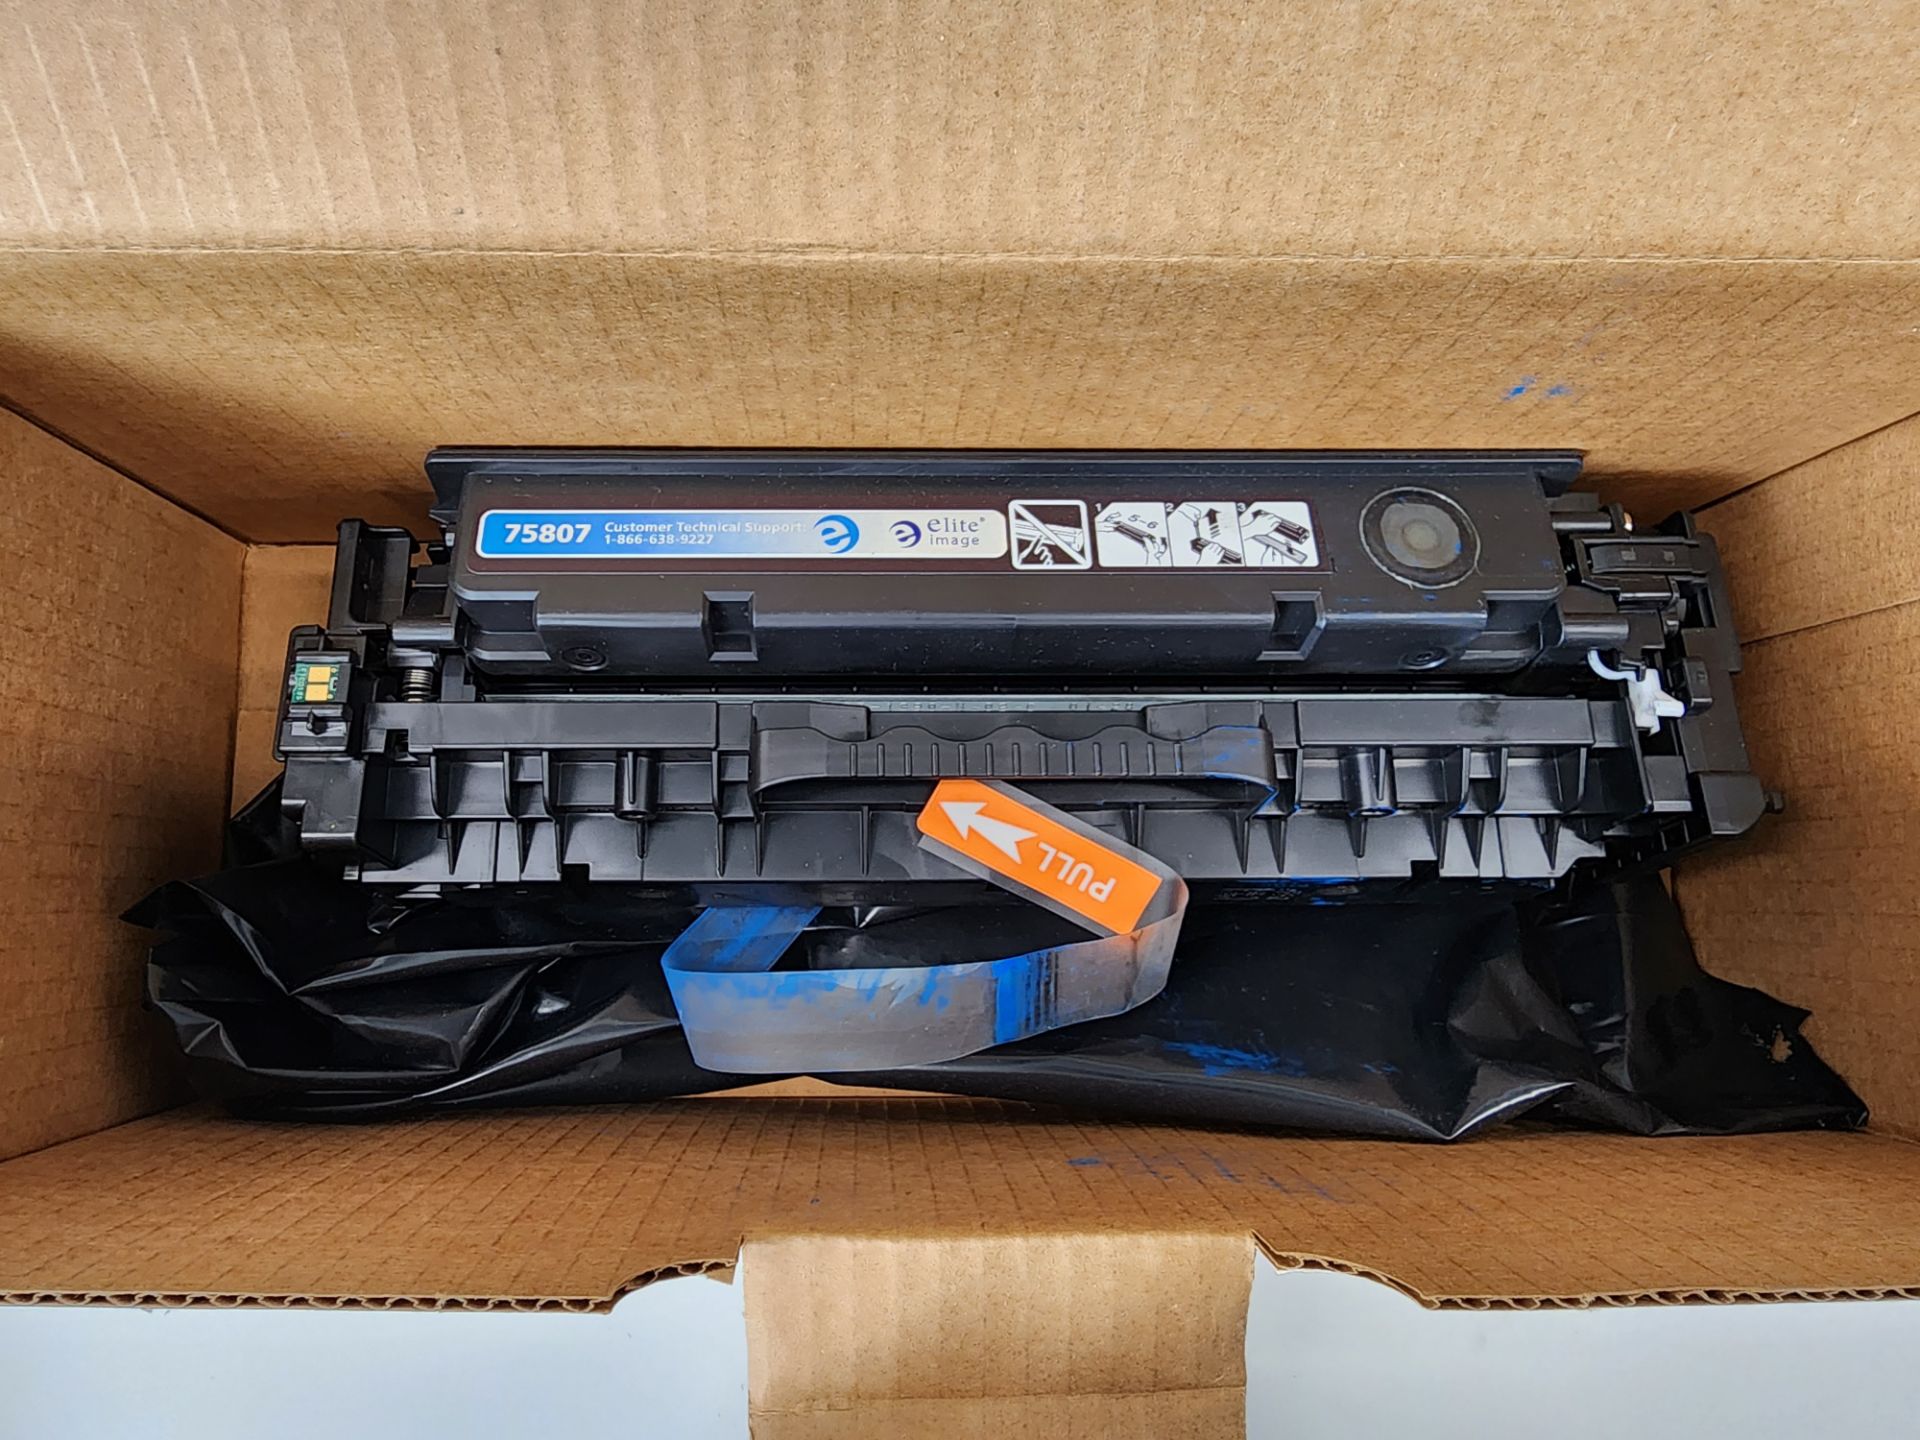 Office Source CE410X Remanufactured Toner Cartridge - Image 3 of 3